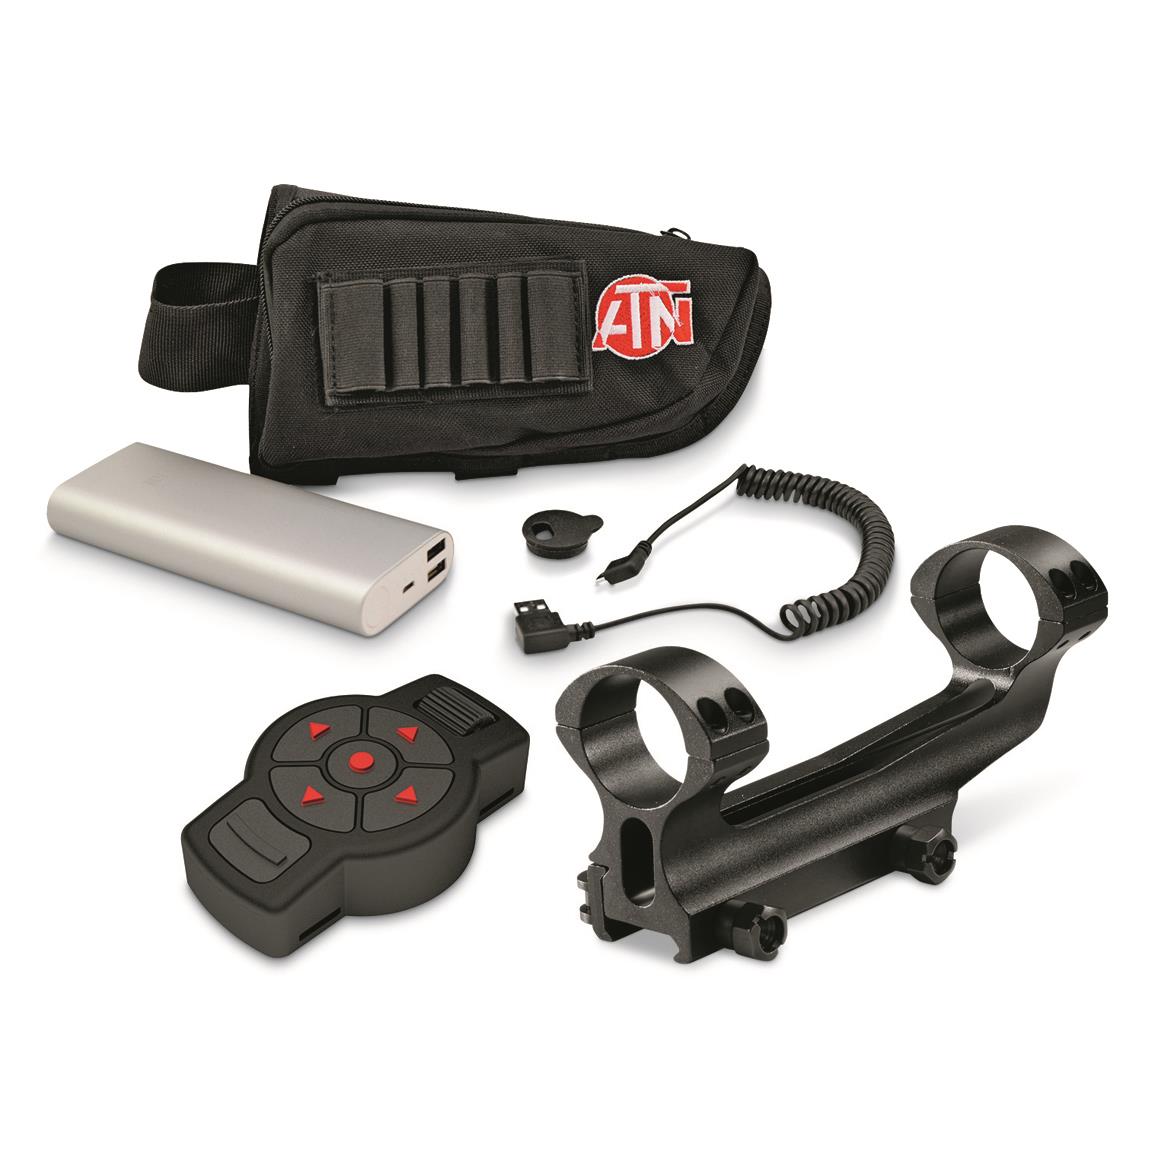 ATN ThOR 4 Ultimate Accessory Bundle, X-TRAC Remote, Extended Battery Kit, and 30mm QD Scope Mount